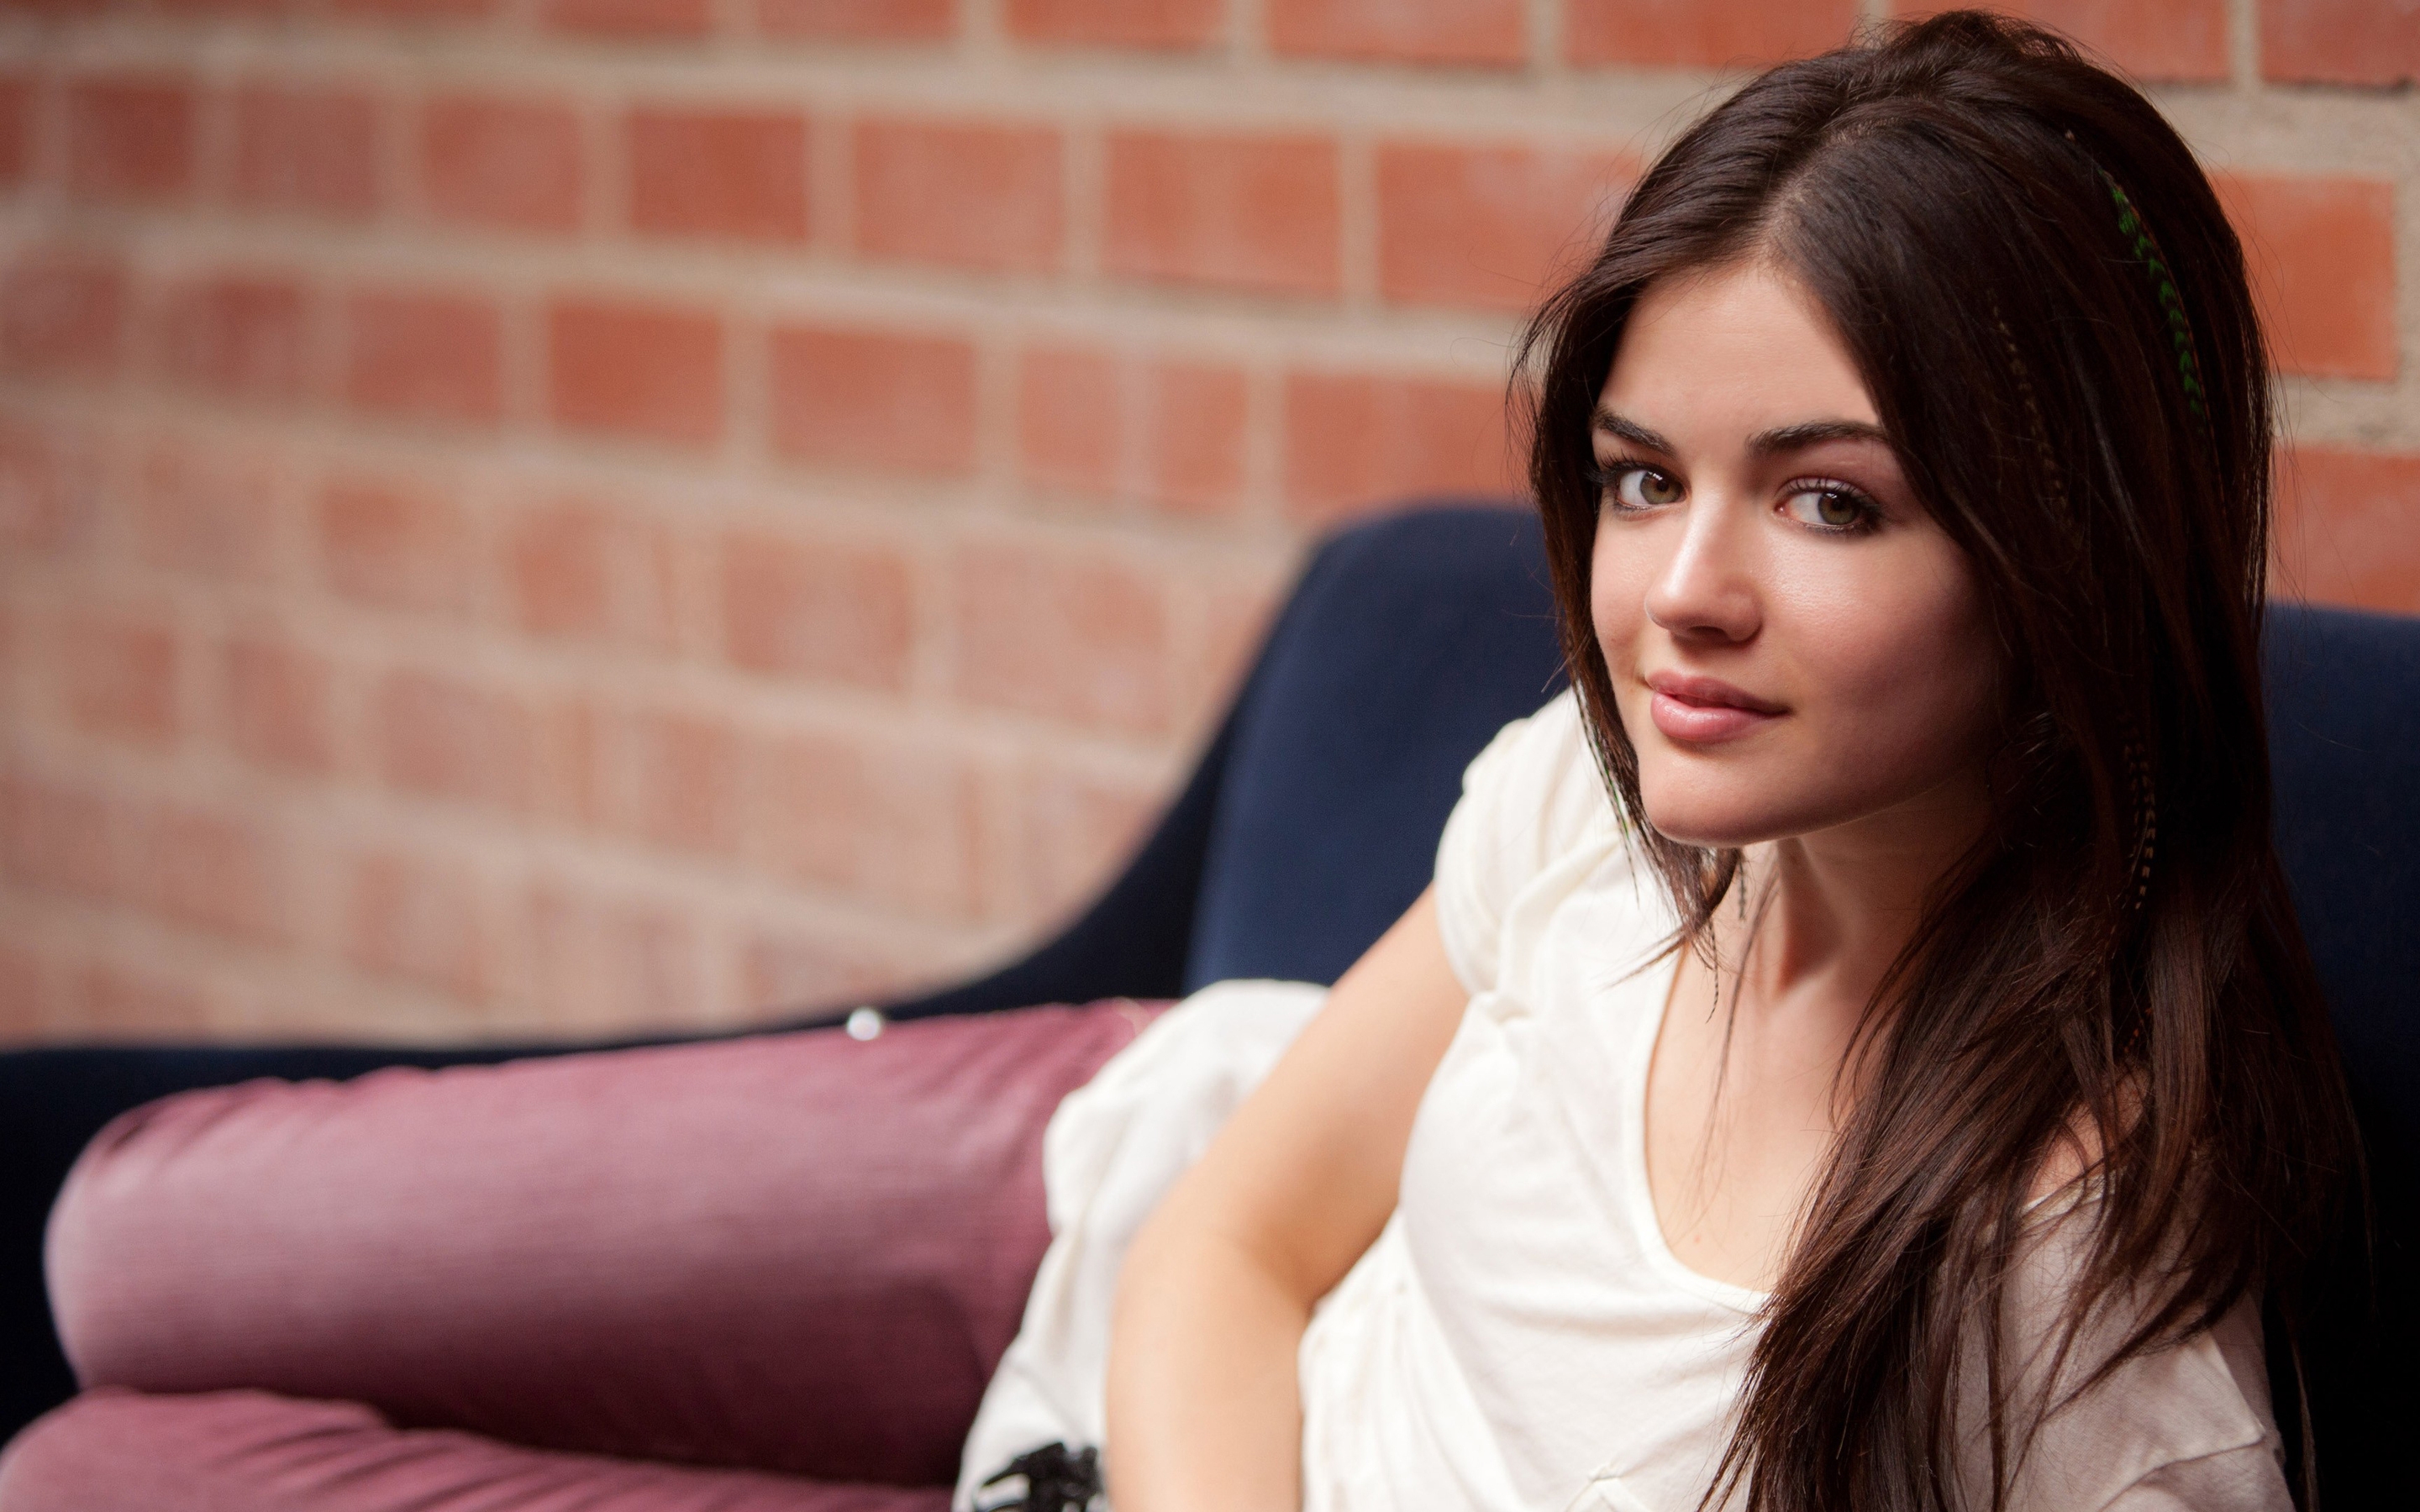 Lucy Hale Relaxing for 2880 x 1800 Retina Display resolution